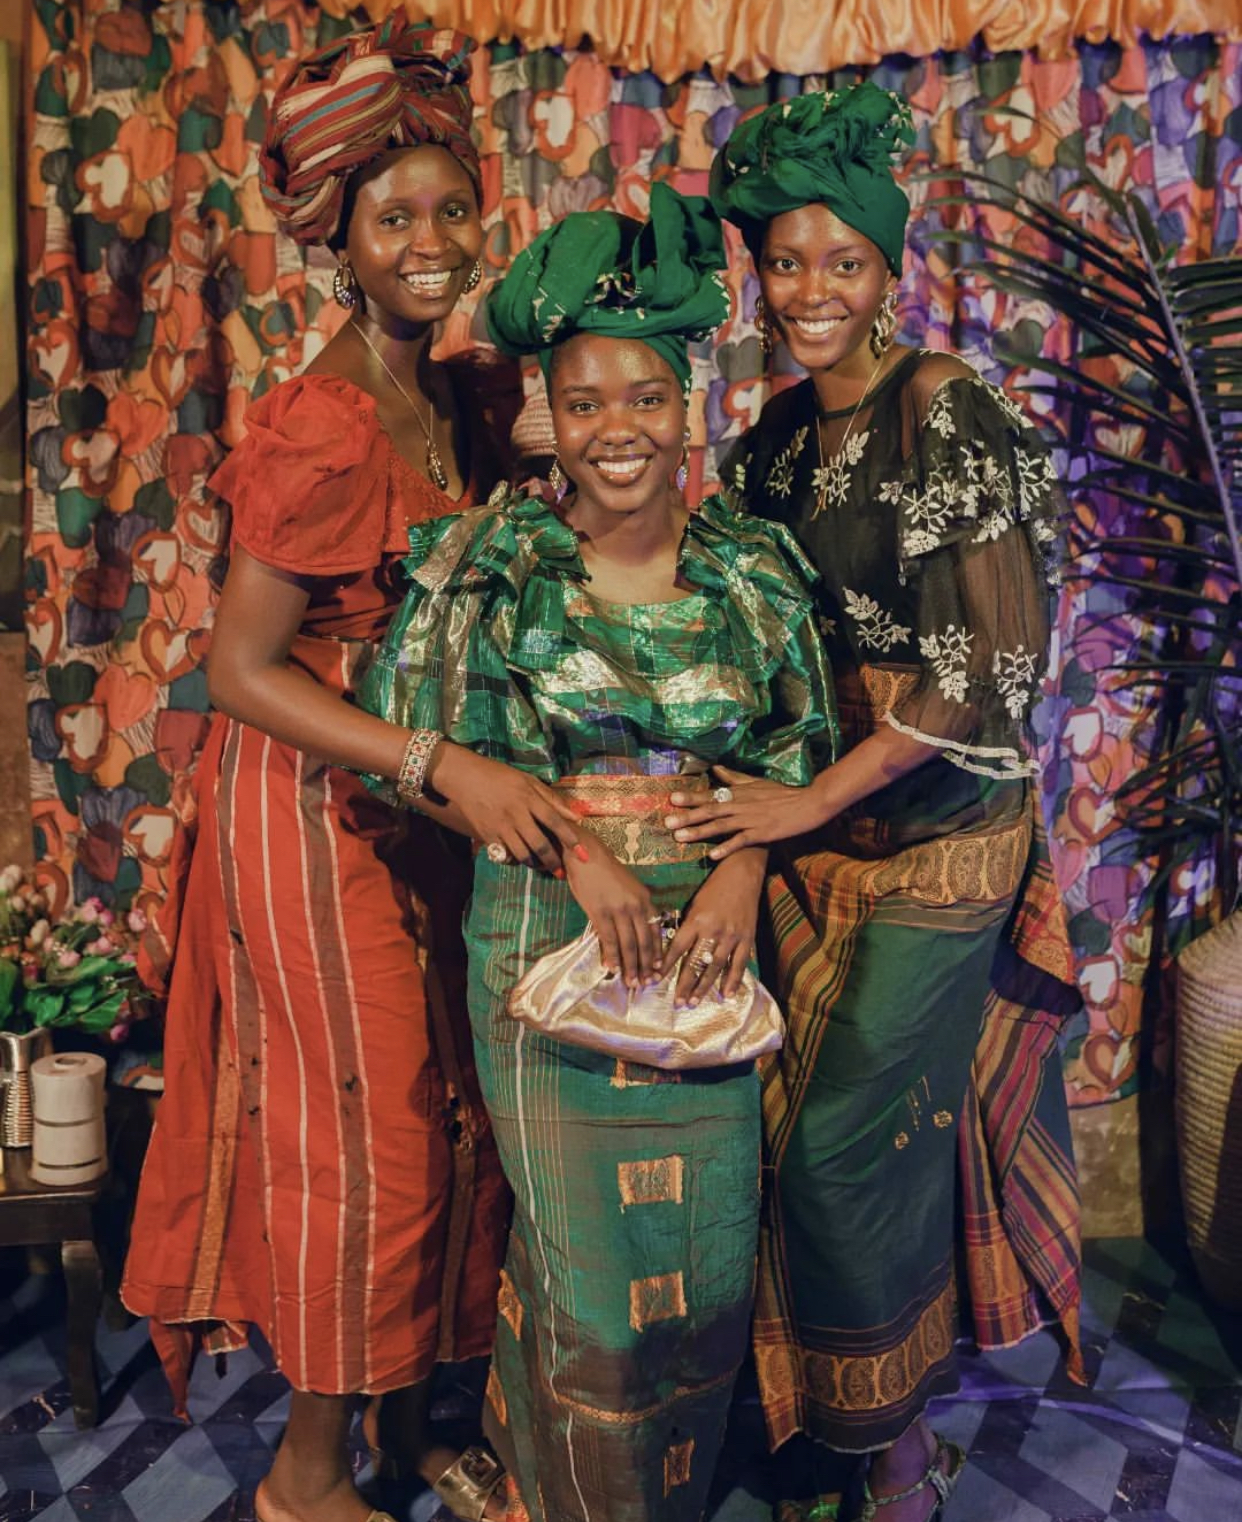 Omonuwa: A photoshoot in honor of the typical traditional fashion sense of Nigerian Women